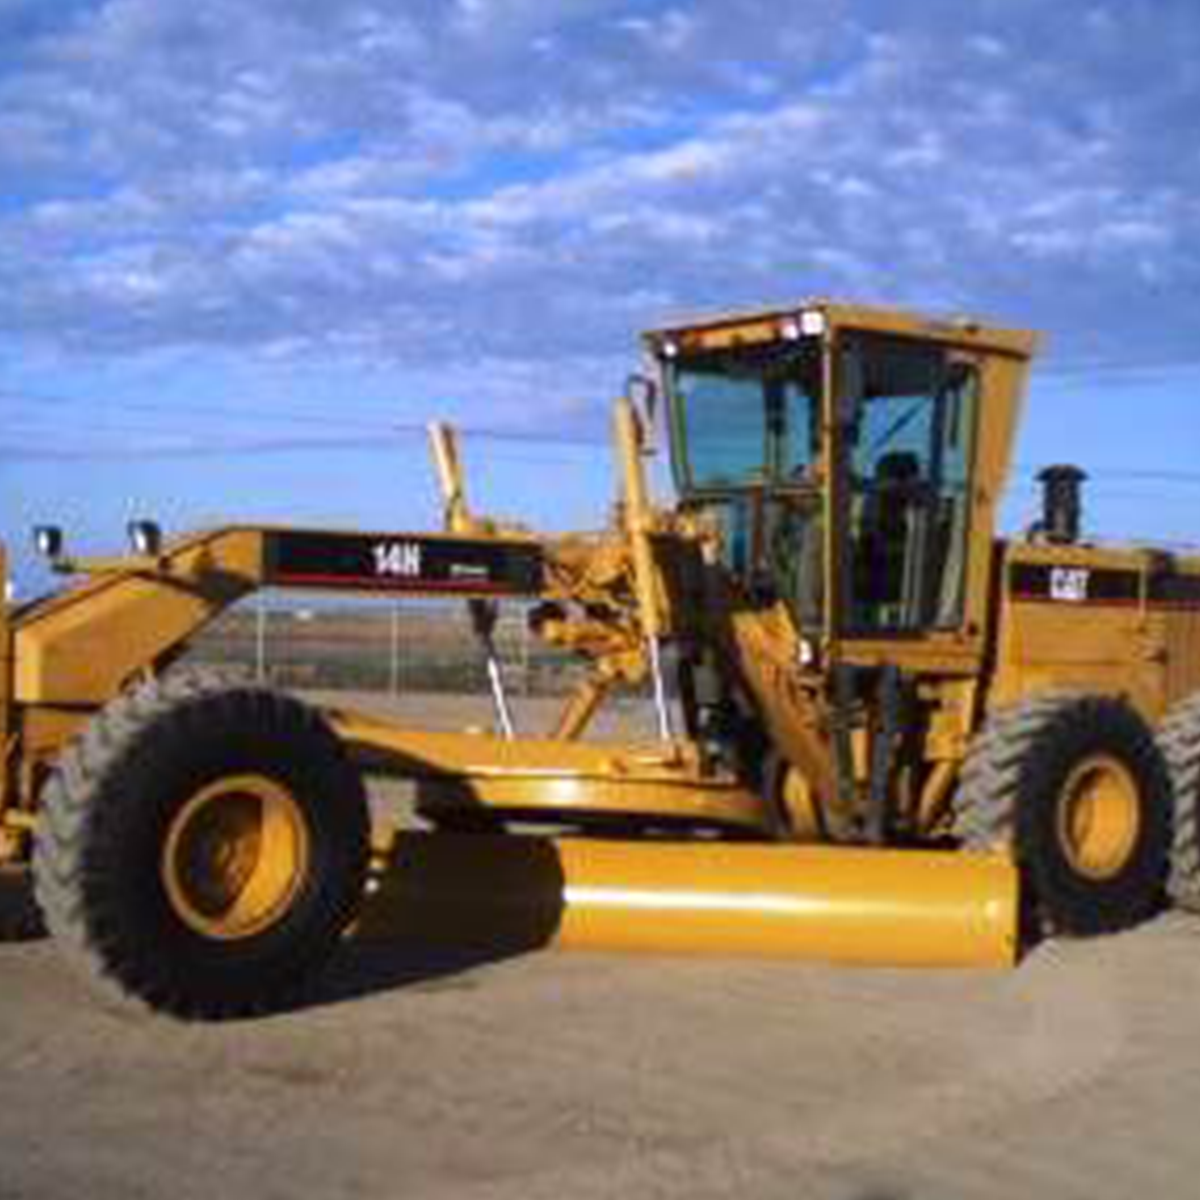 Featured image for “Graders”